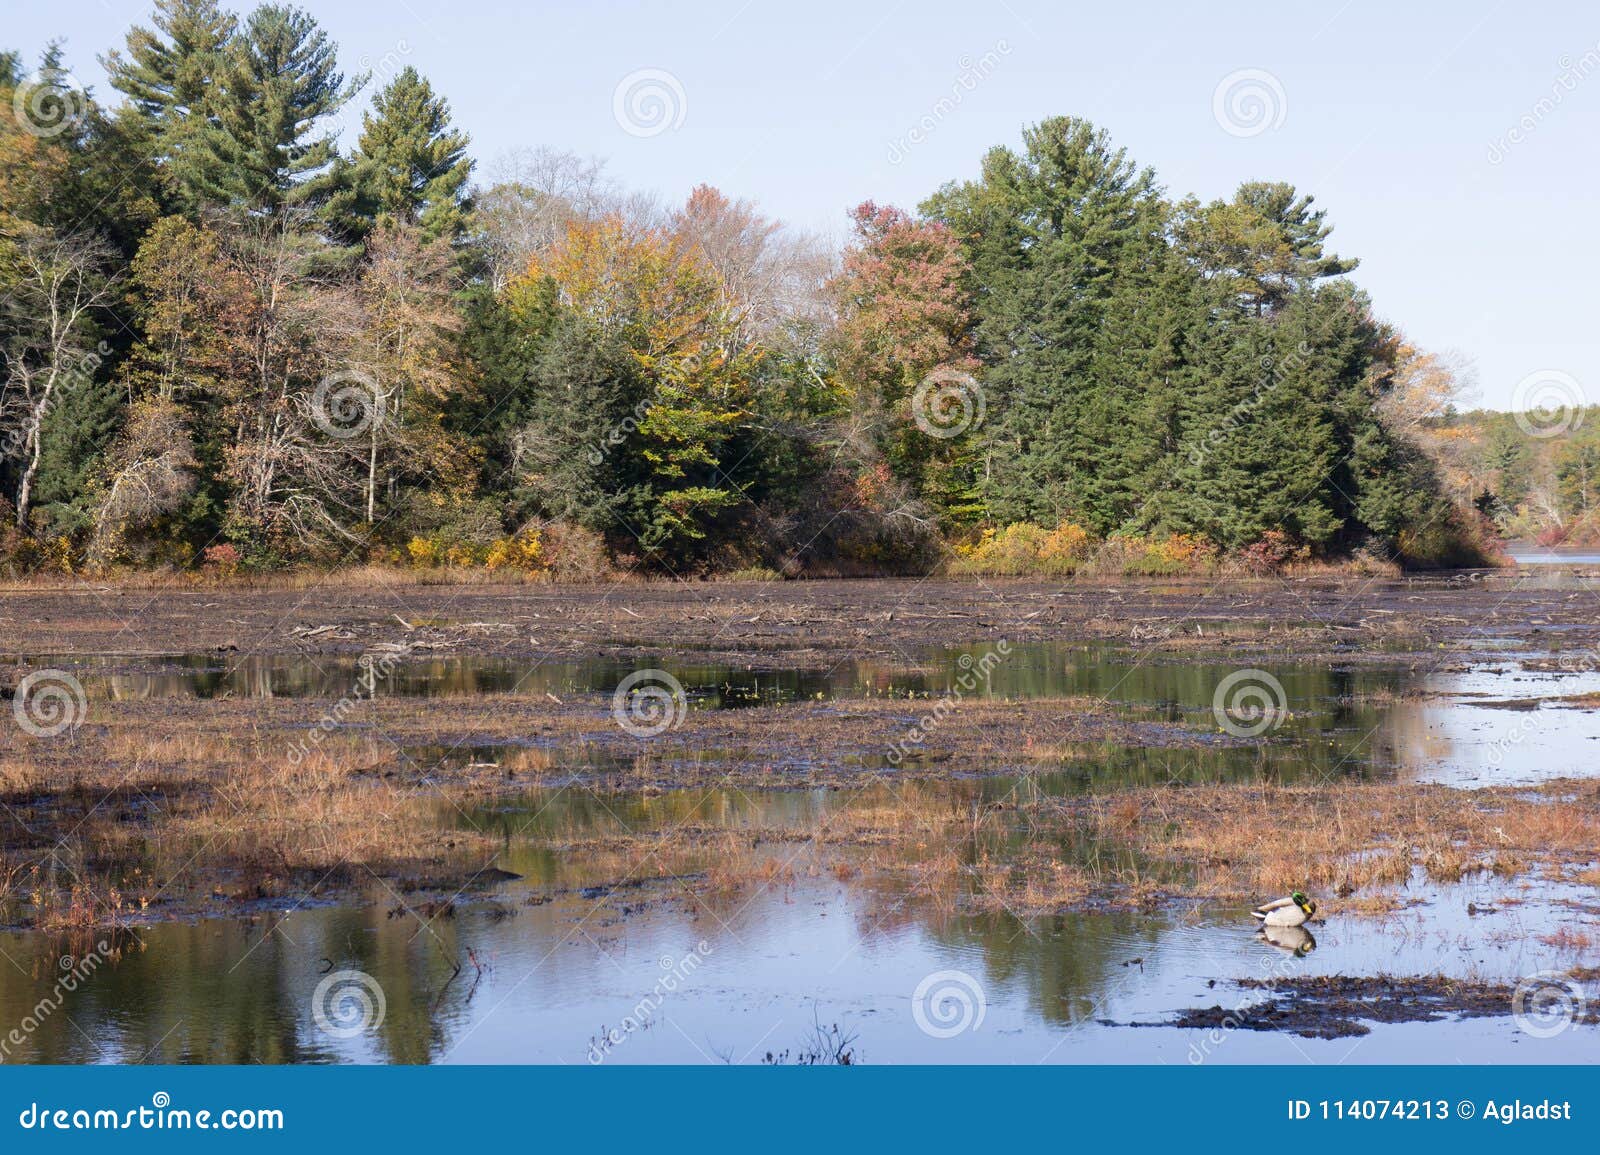 autumn at leach pond in borderland state park, easton ma